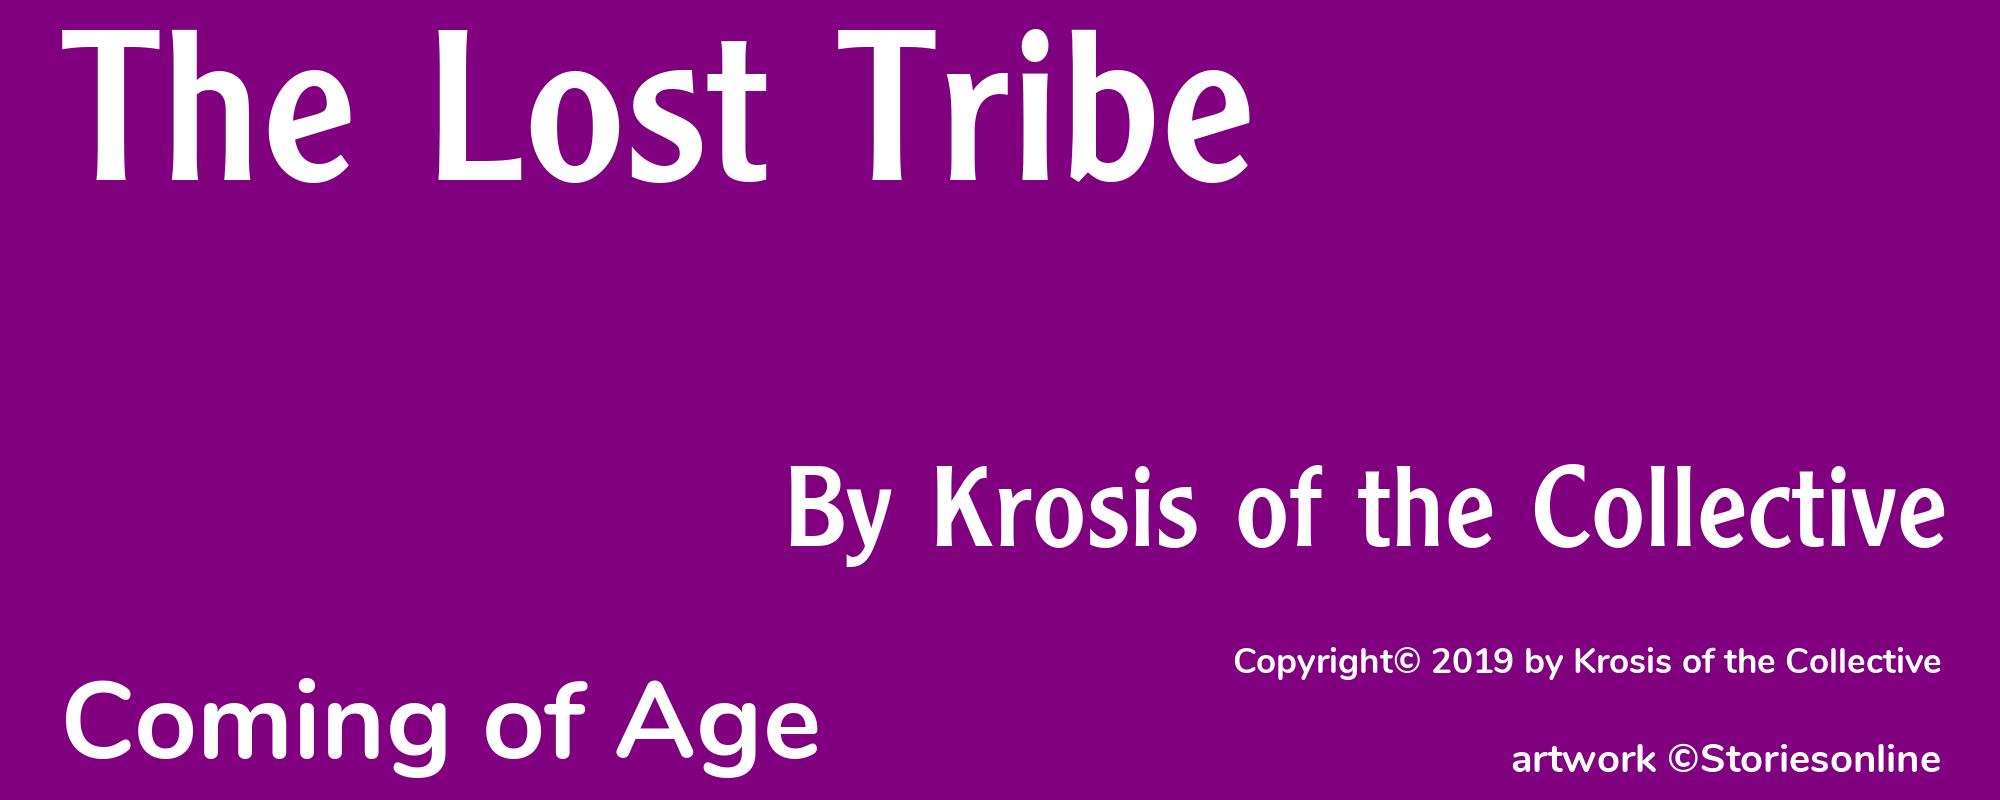 The Lost Tribe - Cover